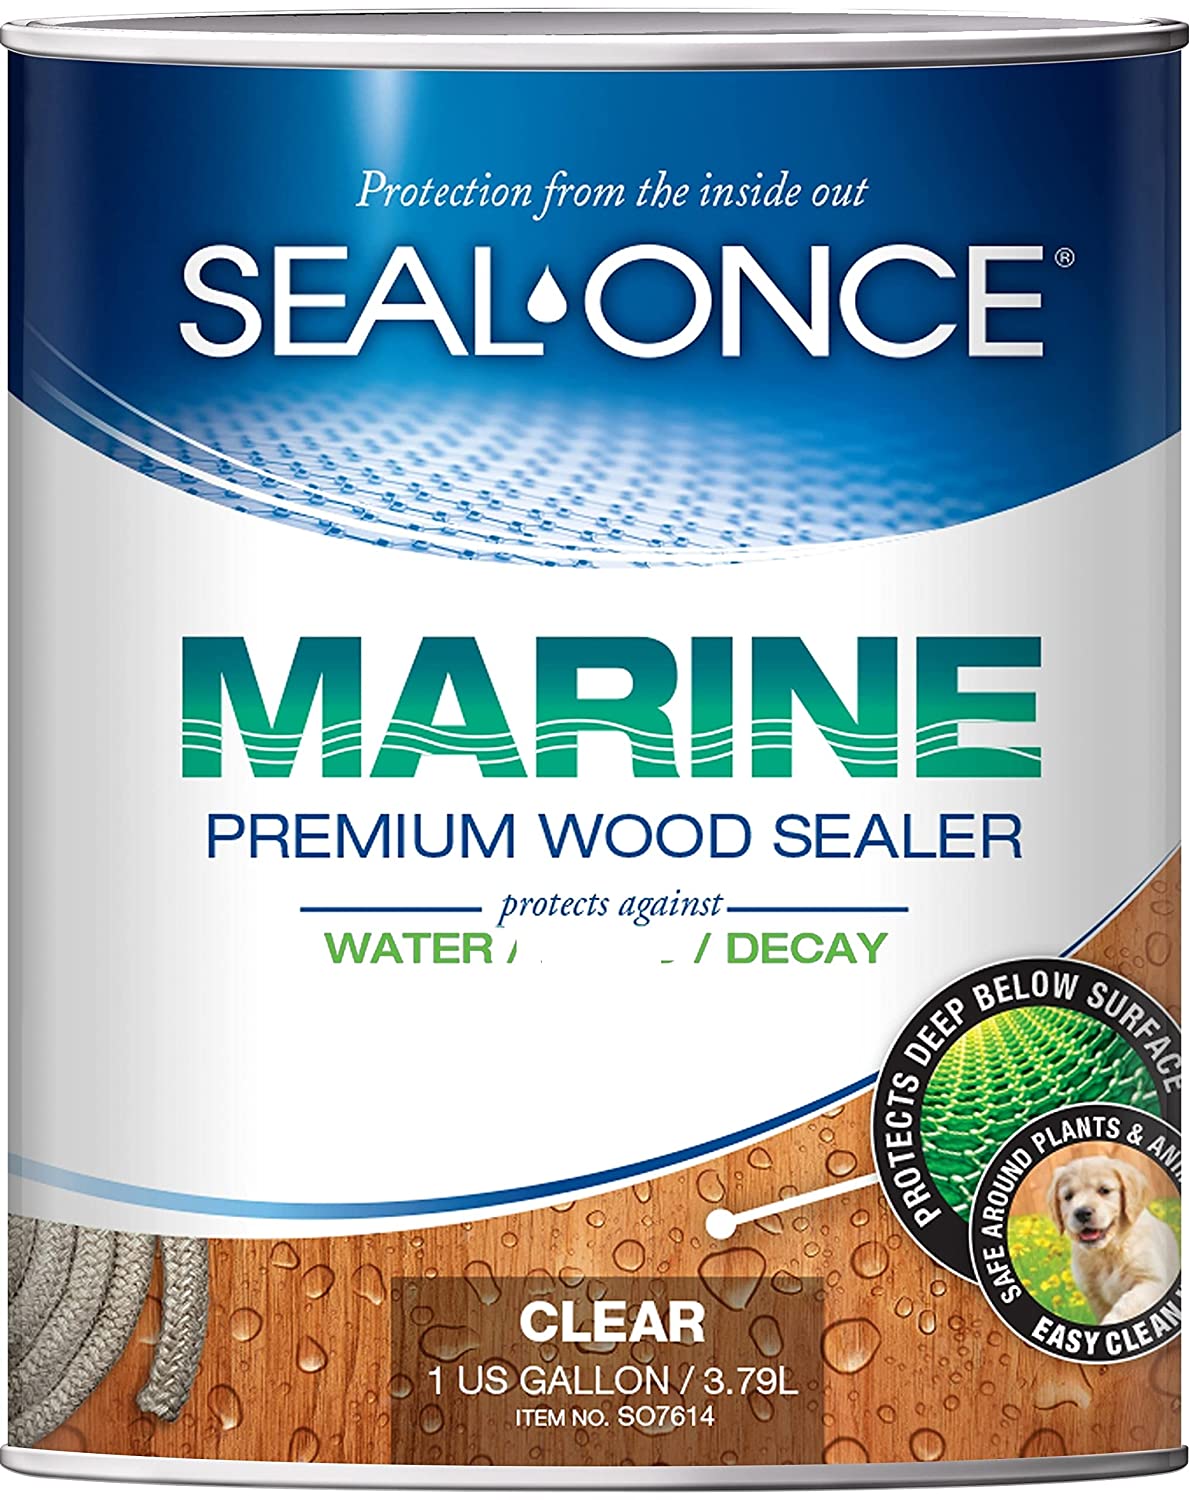 SEAL-ONCE MARINE - 1 Gallon Penetrating Wood Sealer, Waterproofer & Stain. Water-Based, Ultra-low VOC formula for high-moisture areas to protect wood docks, decks, piers & retaining walls.